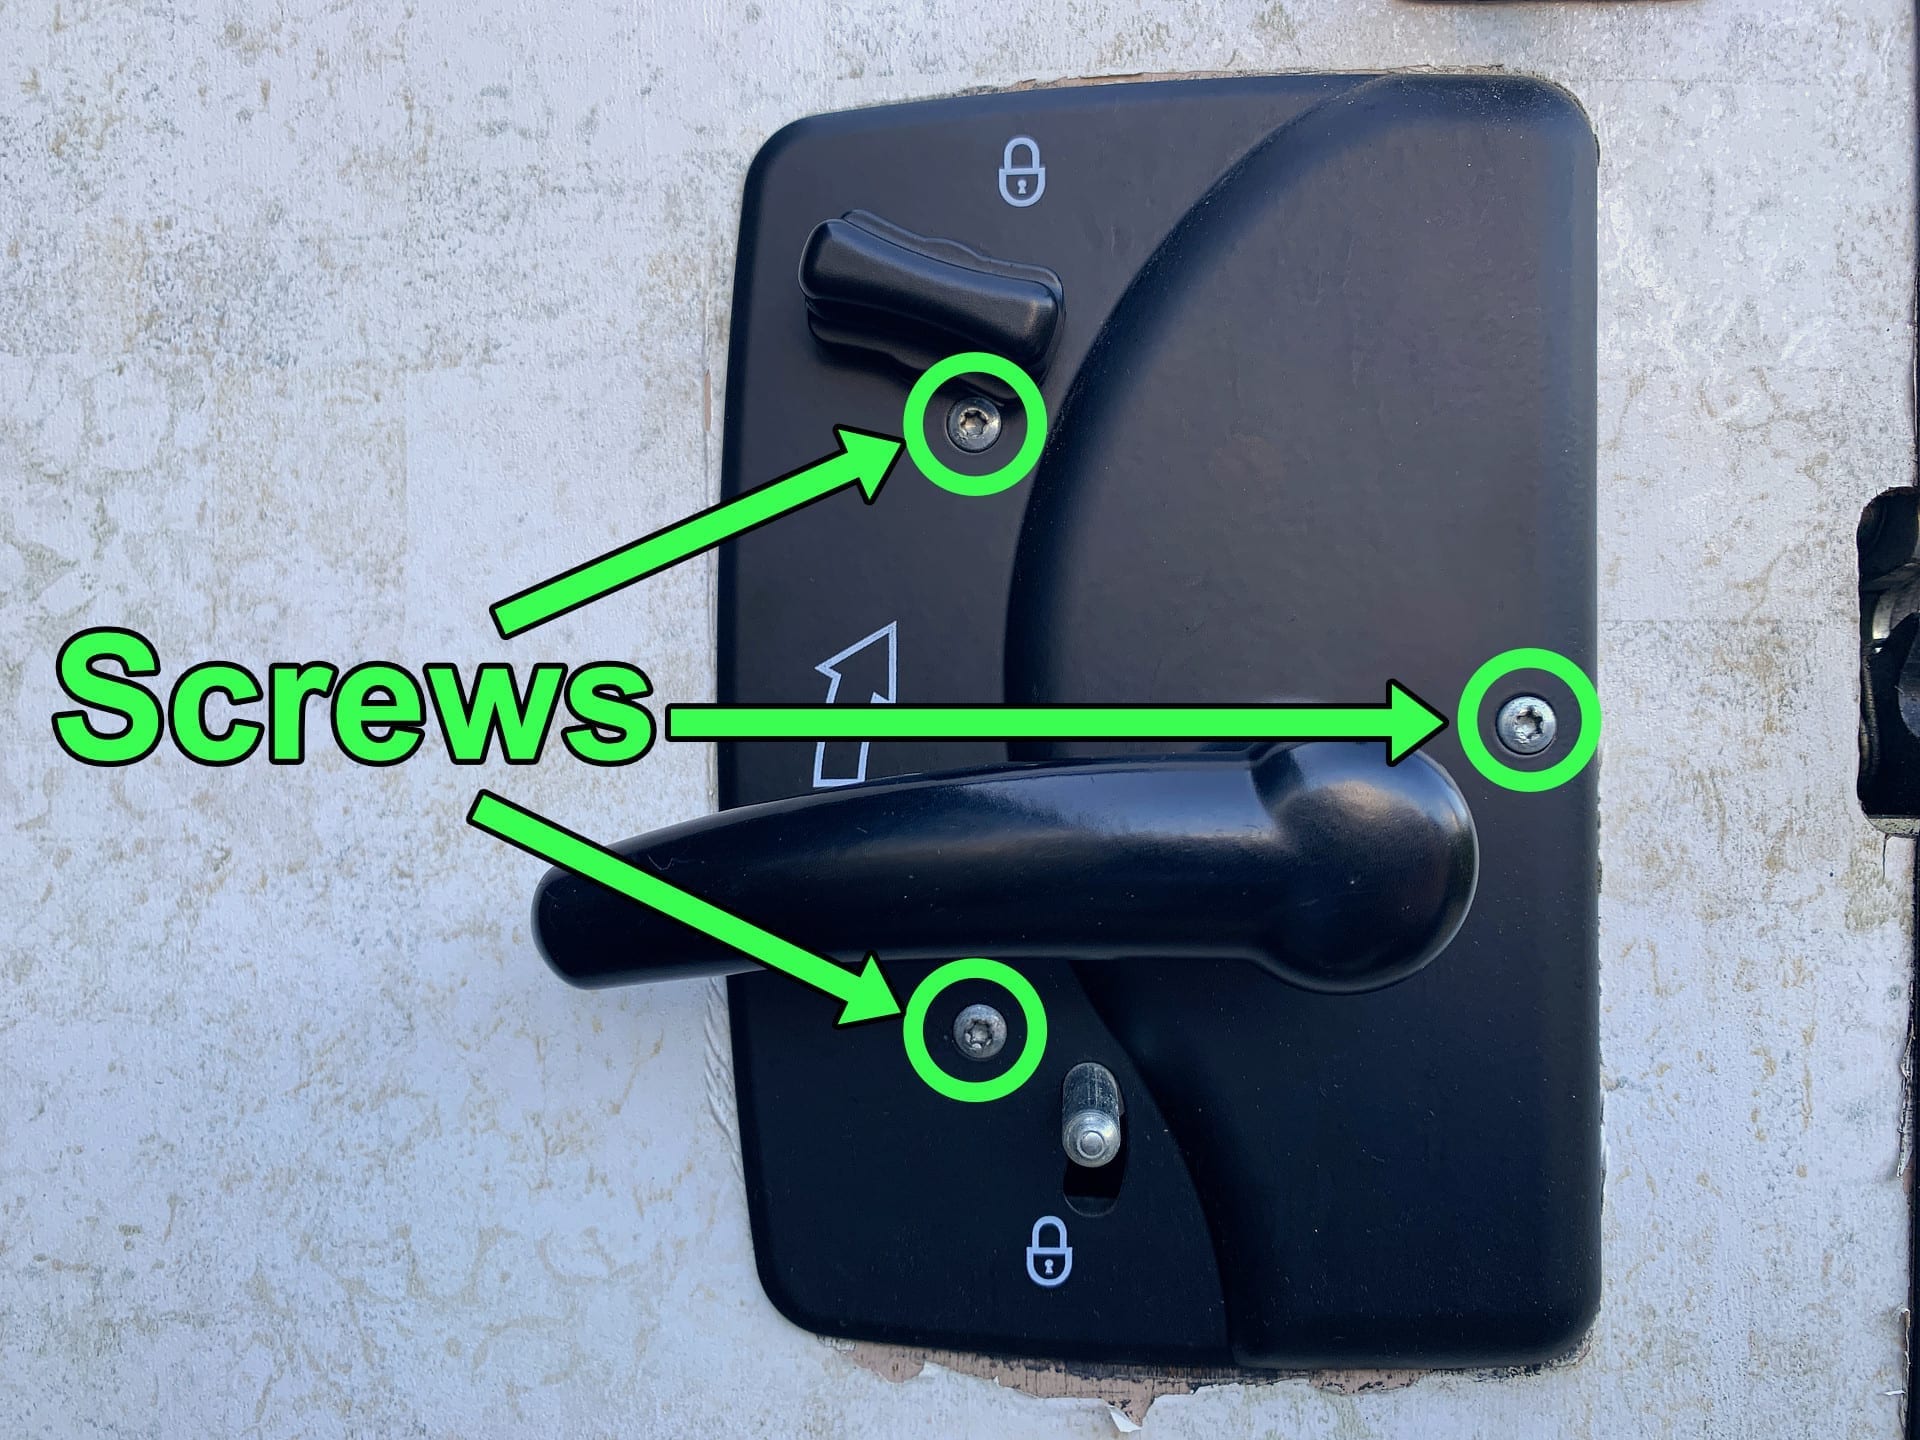 Screw locations for removing your RV door latch for repair or replacement